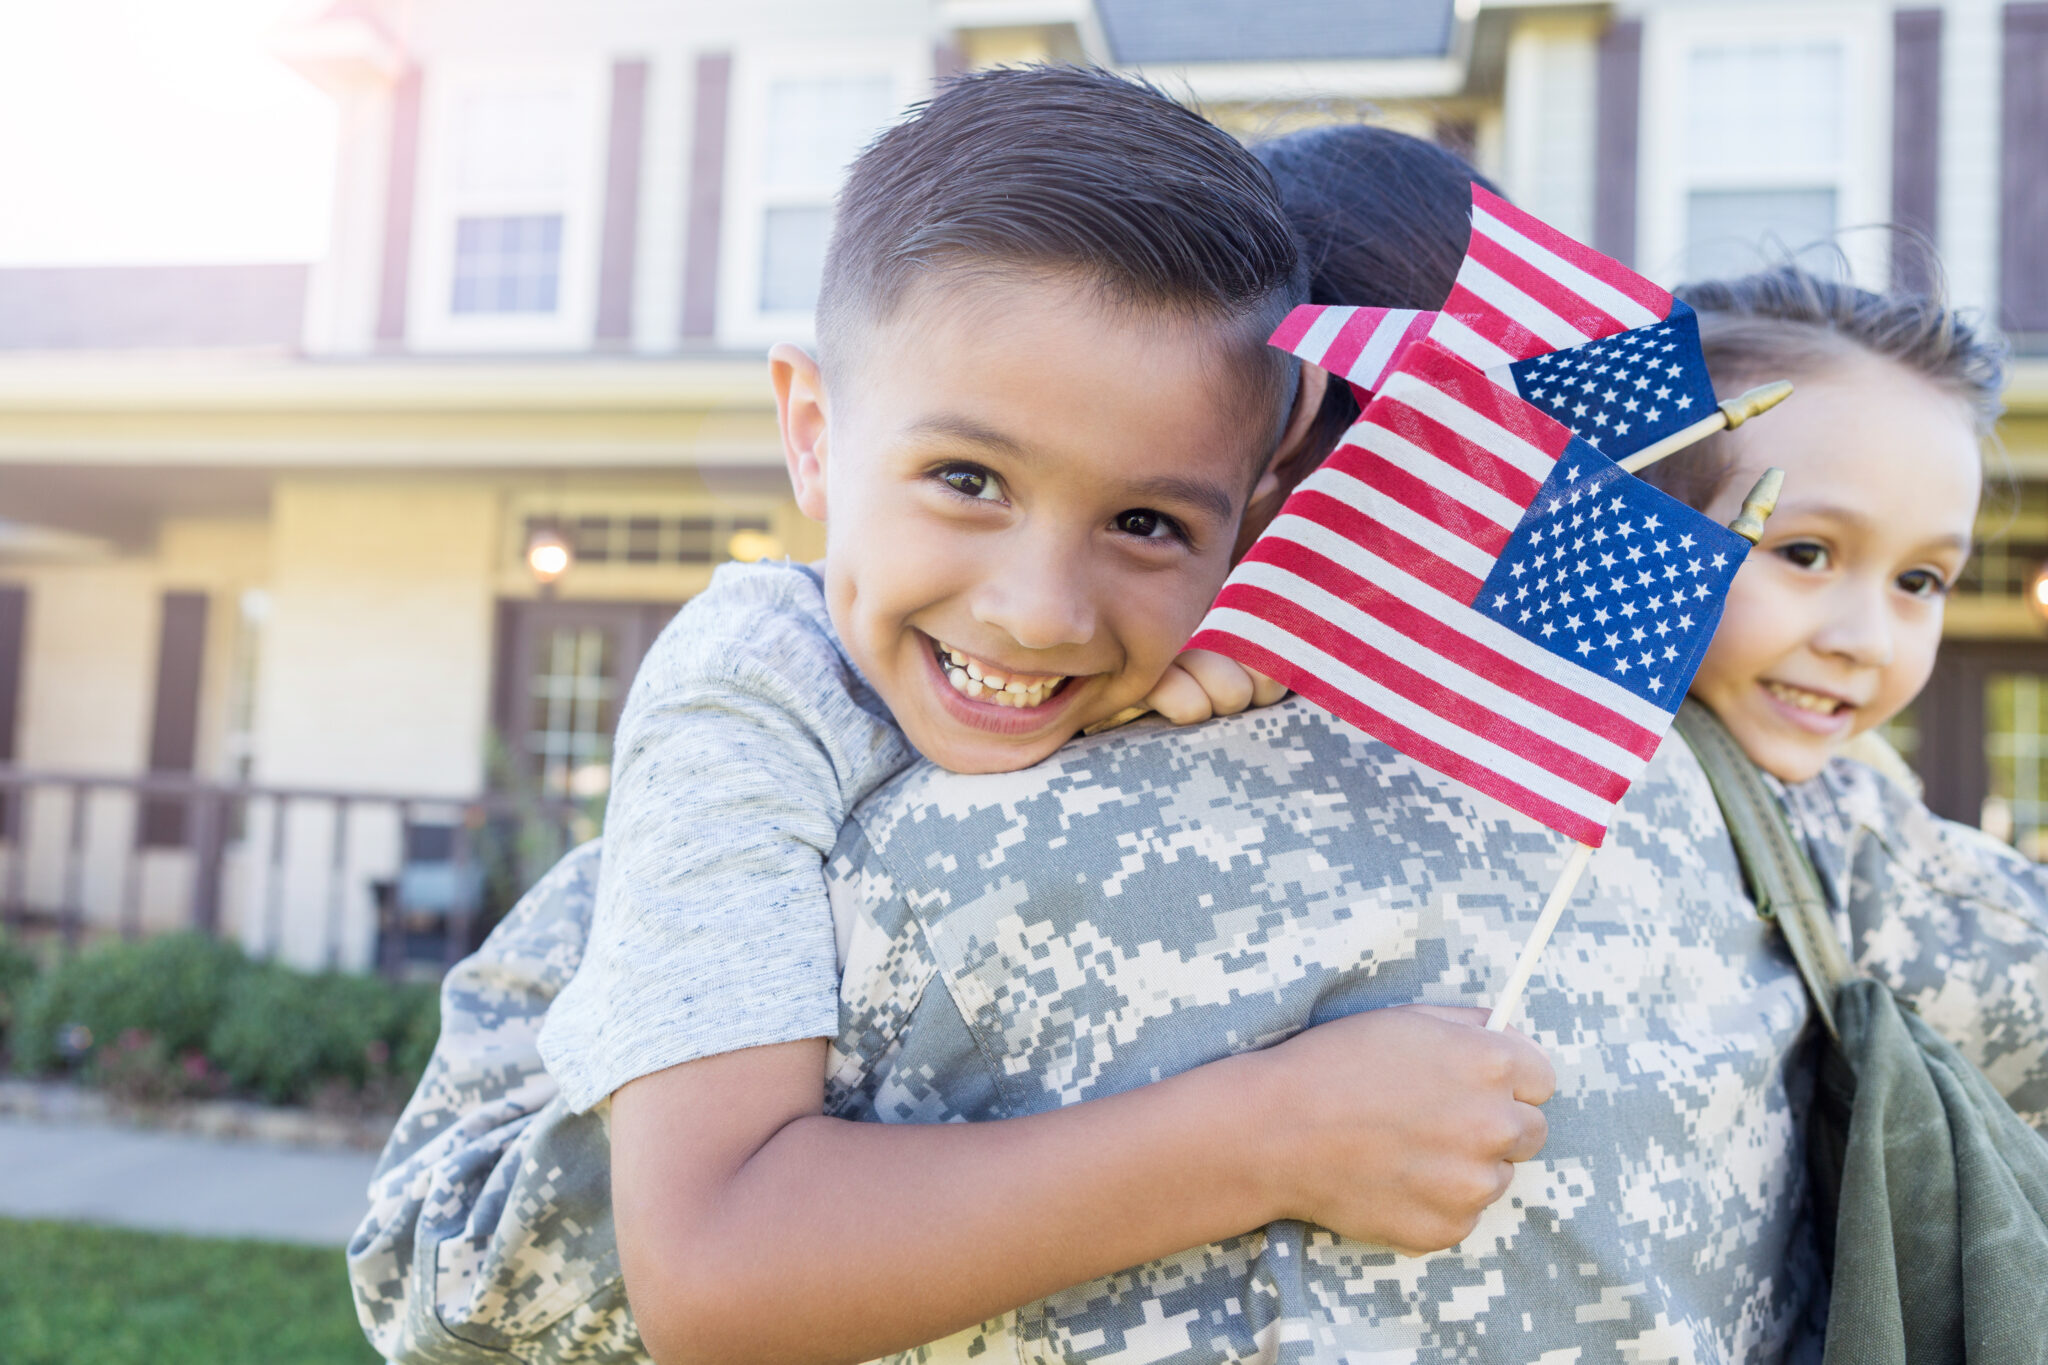 oung, Hispanic boy smiles as he holds a flag in each hand and smiles. He and his sister hug his mother in uniform who has just arrived home.